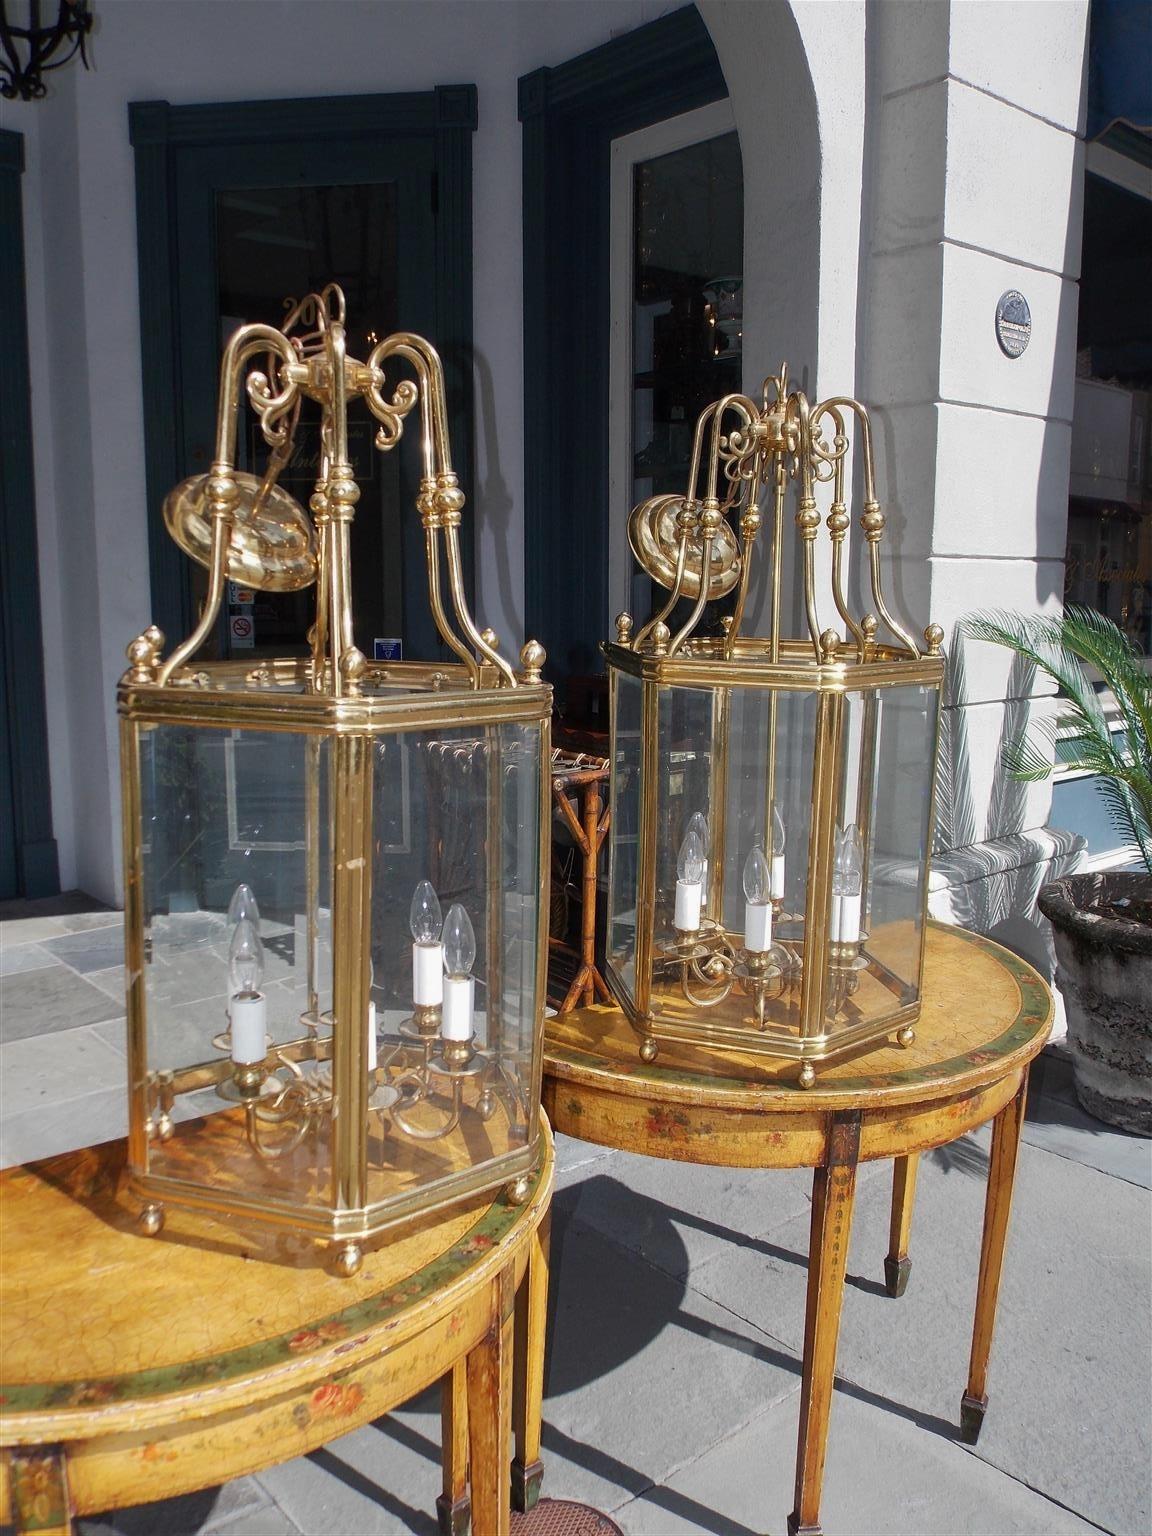 Pair of American brass colonial style hexagon hanging hall lanterns with decorative scrolled bulbous arms, stylized acorn finials, original beveled glass, six light interior cluster, and resting on a molded edge base with ball feet, Late 19th